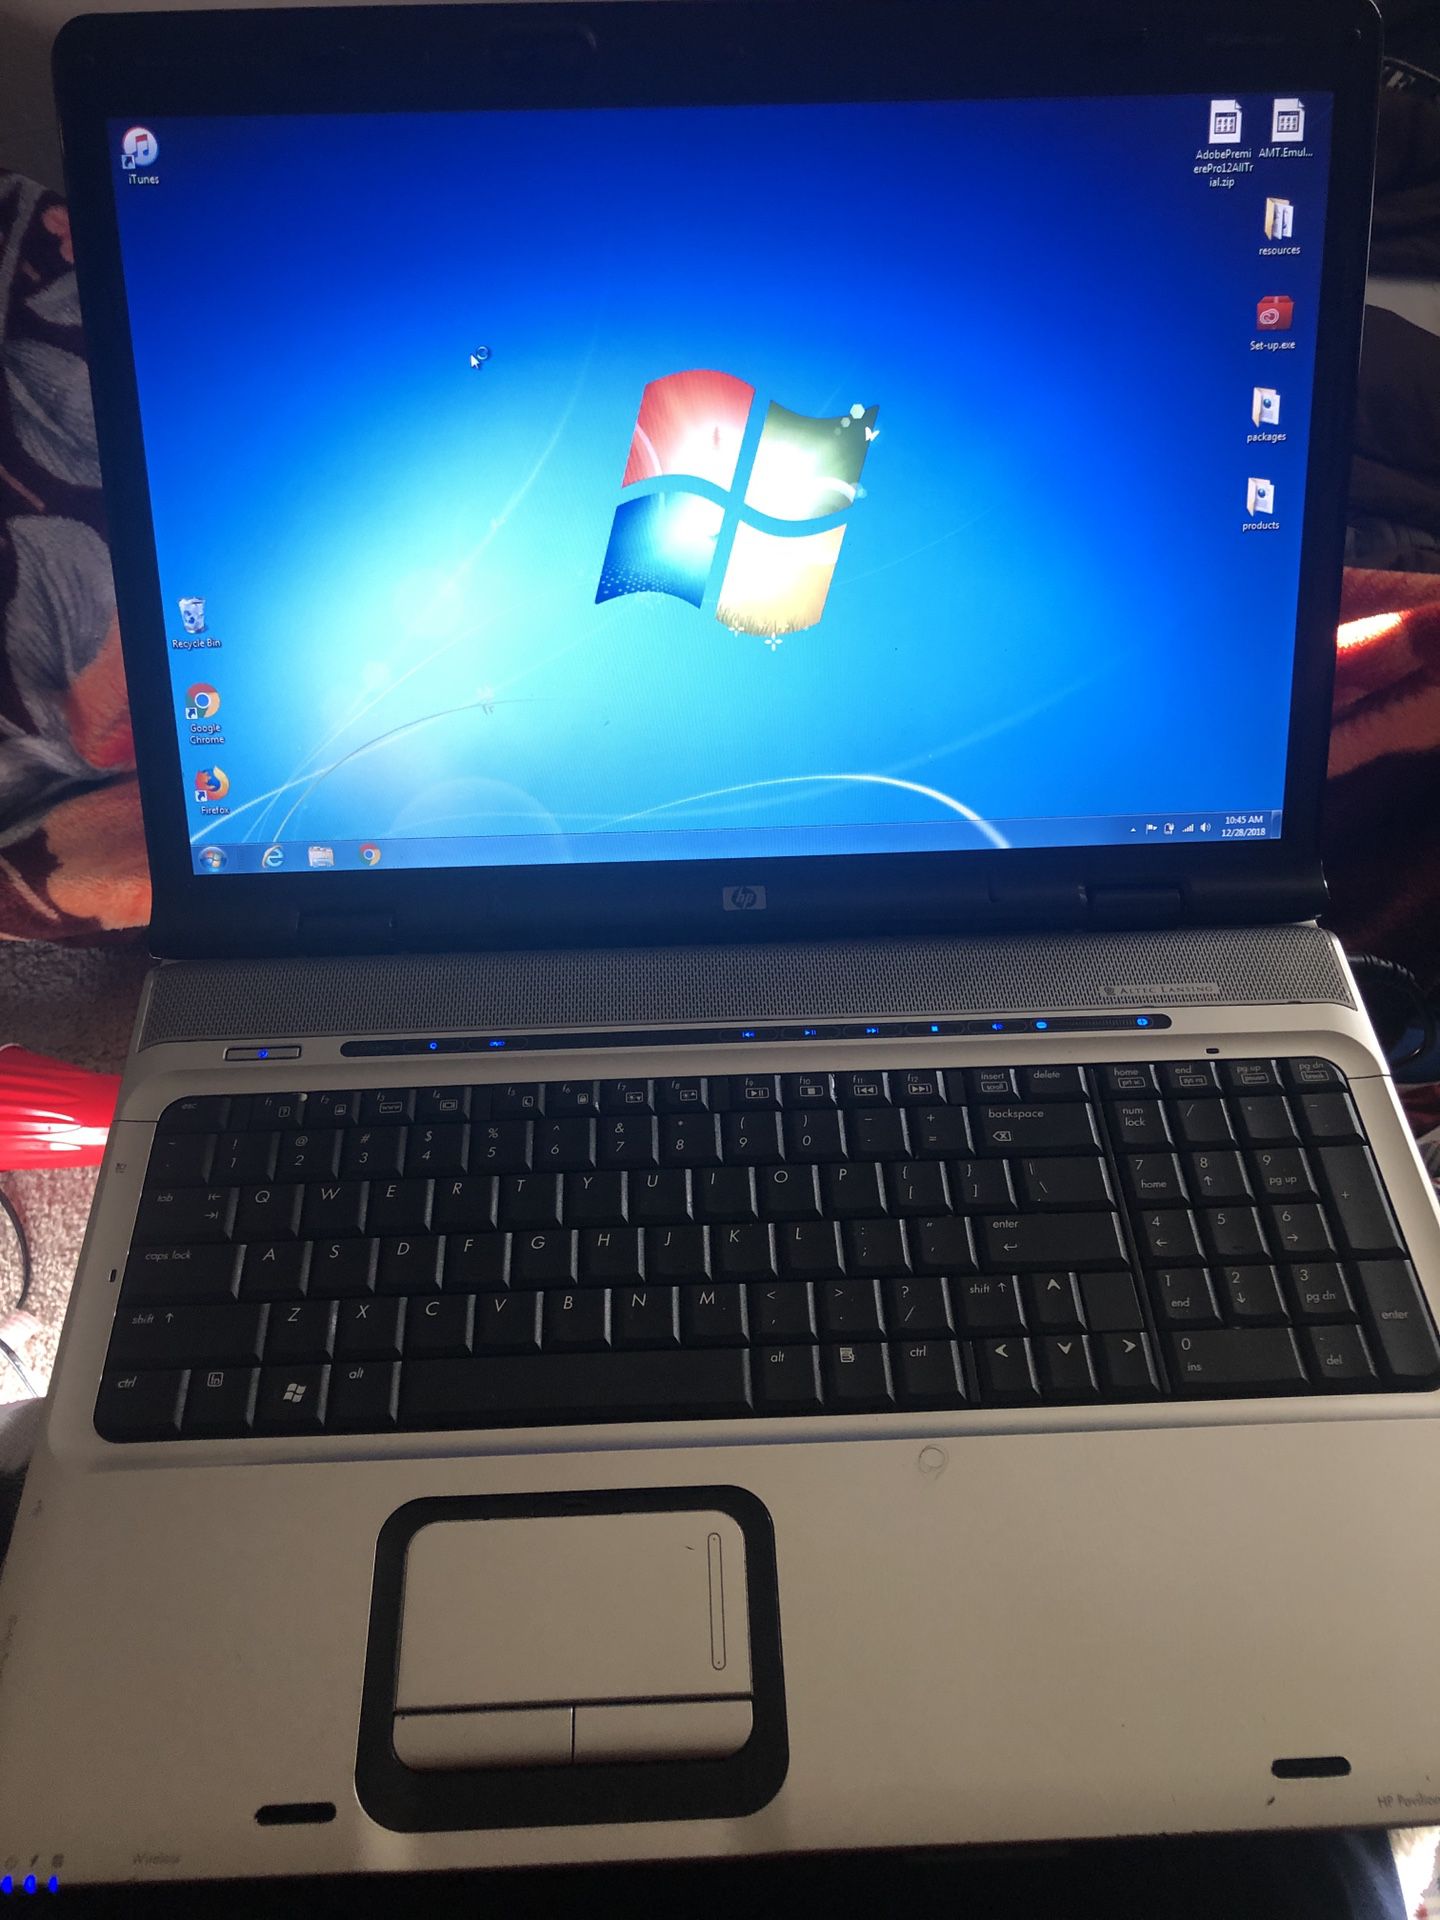 Used HP DV9000 17” Notebook PC w/ adapter.